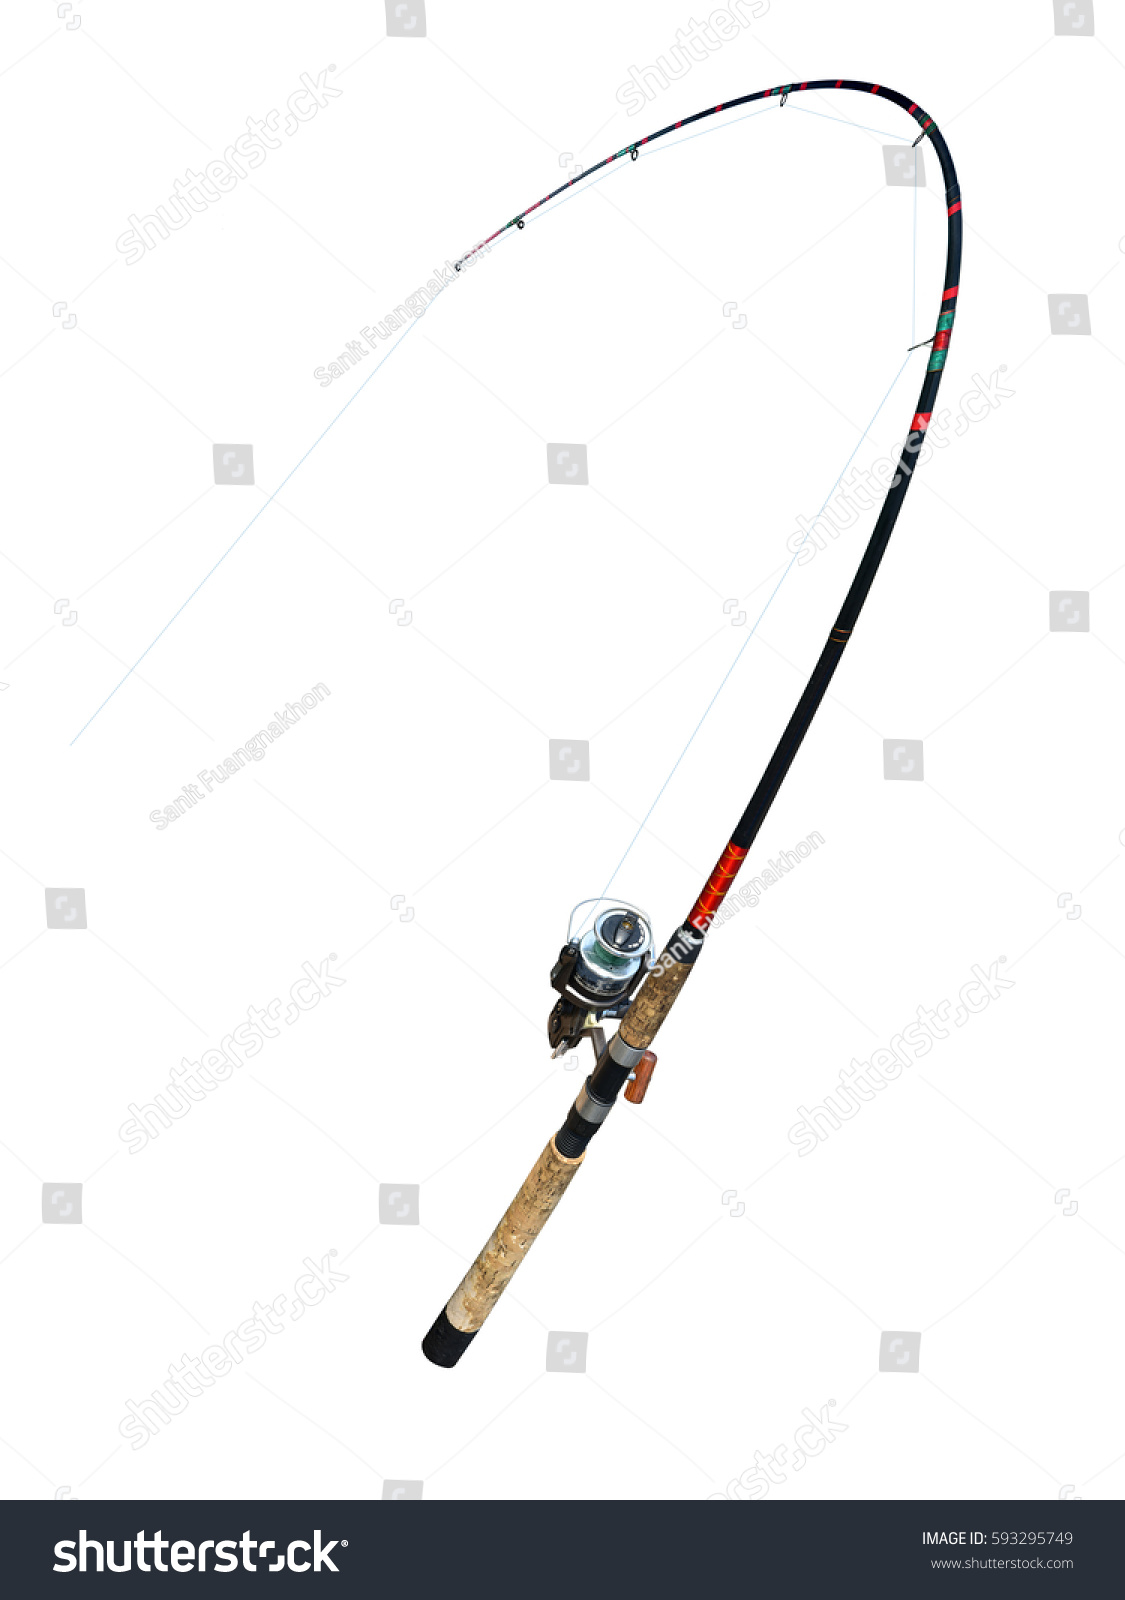 Rod and reel Ayer's rod tension rod buckling in the important moments.
Photo isolated on white background with clipping path. #593295749